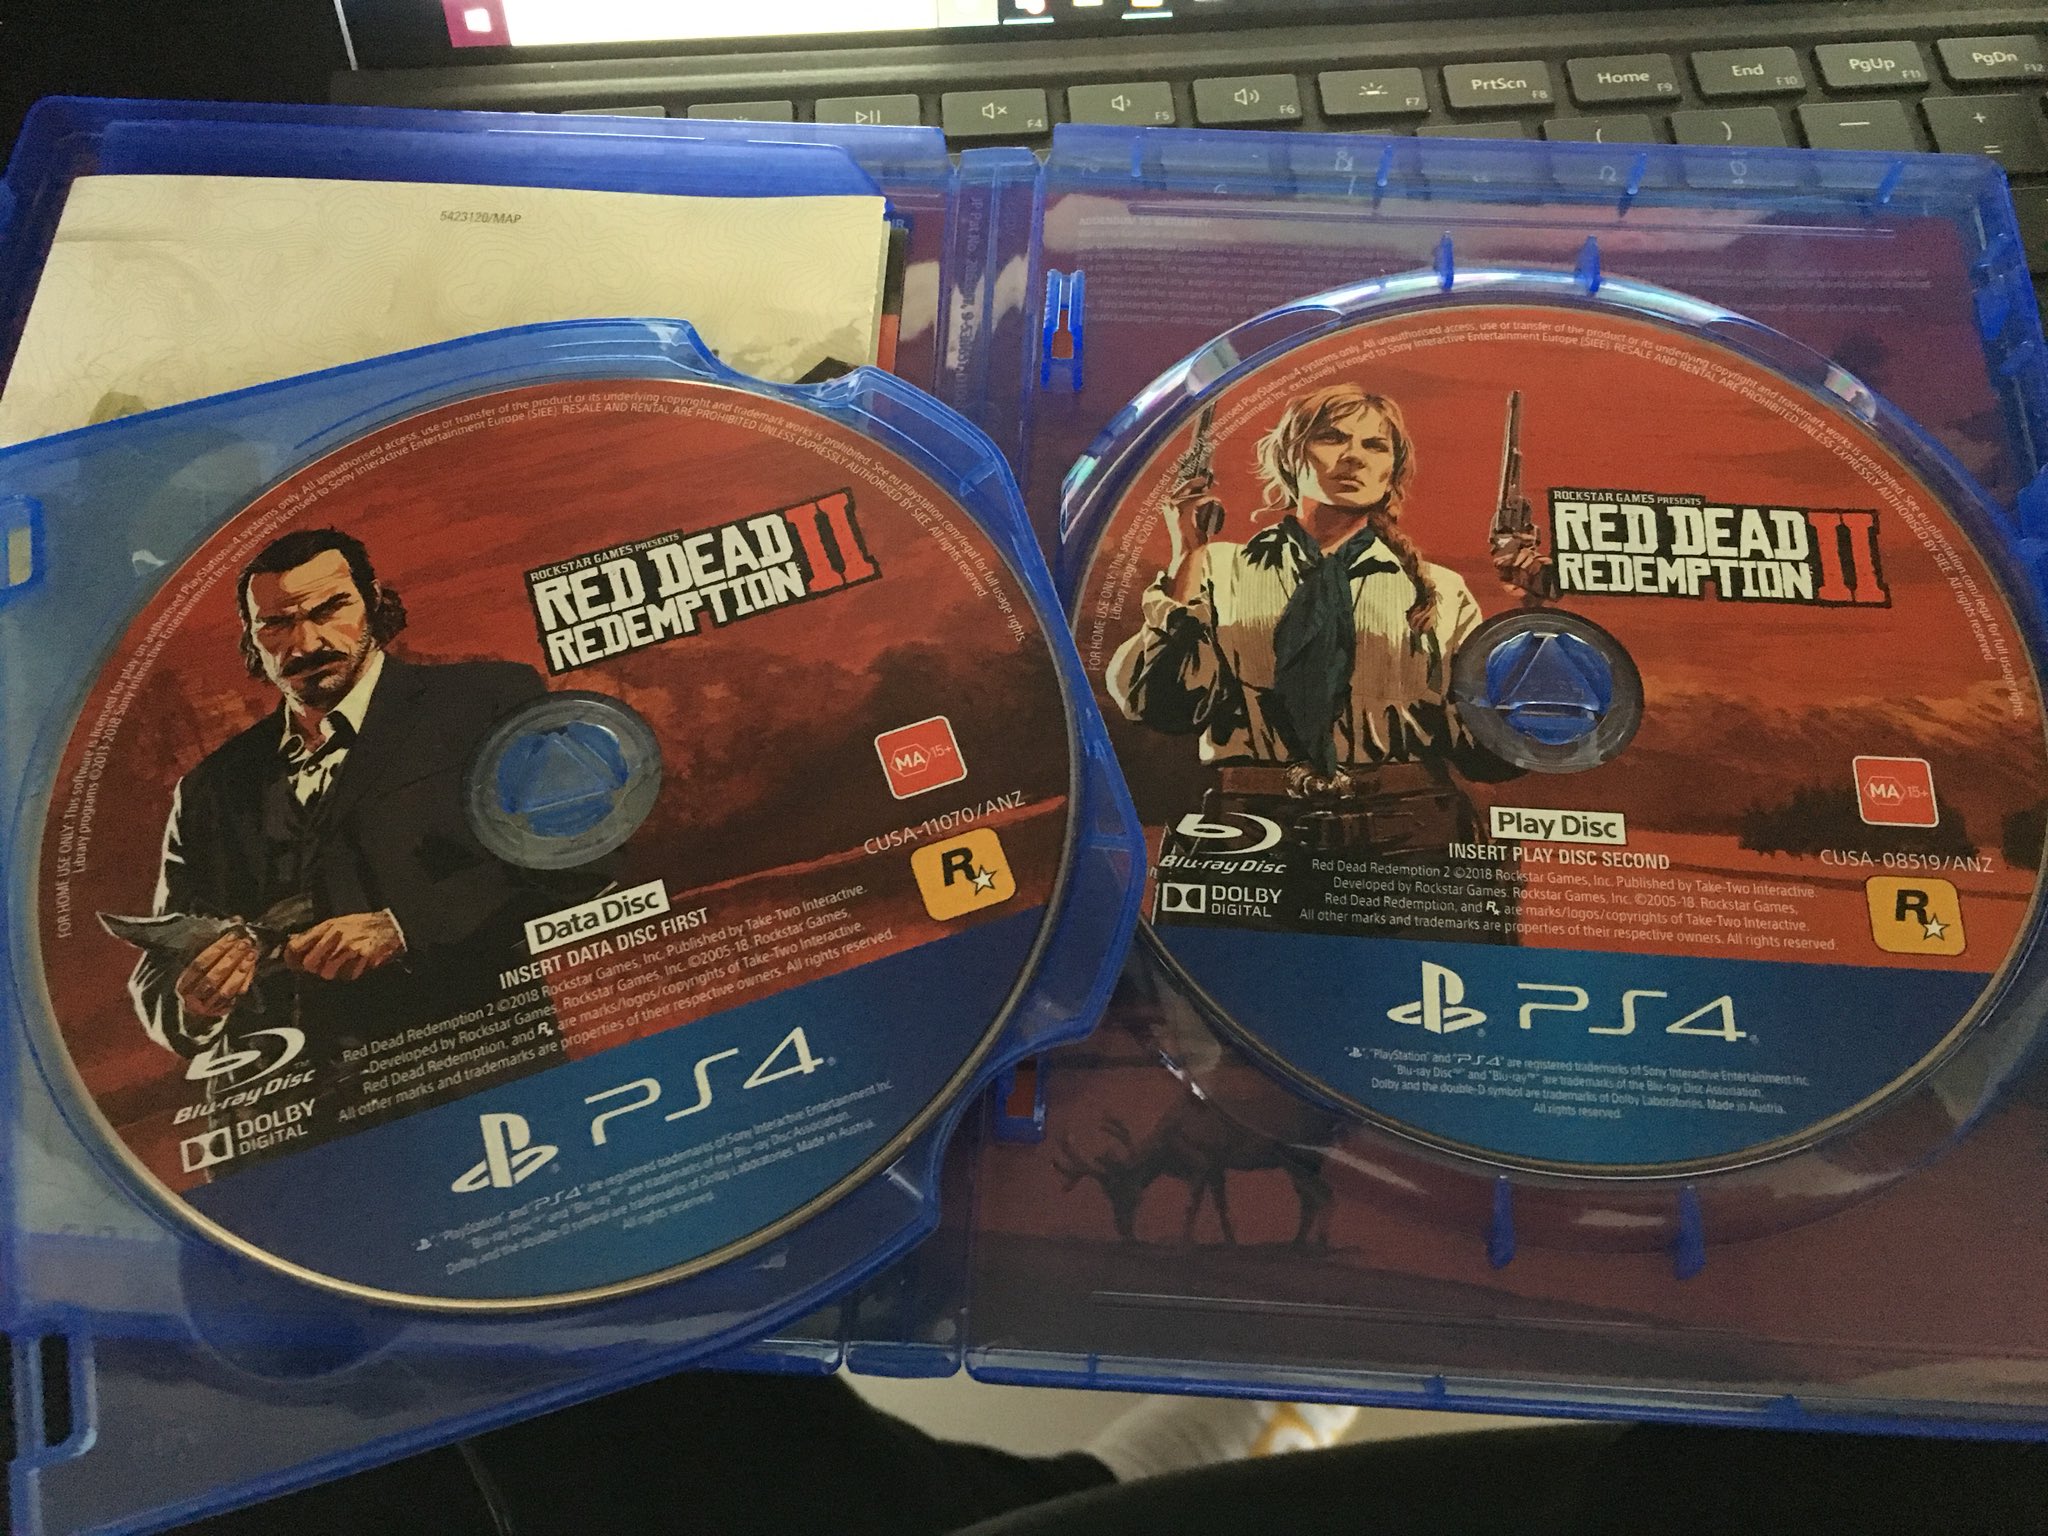 Red Dead Redemption 2 PC (No CD/DVD) Price in India - Buy Red Dead